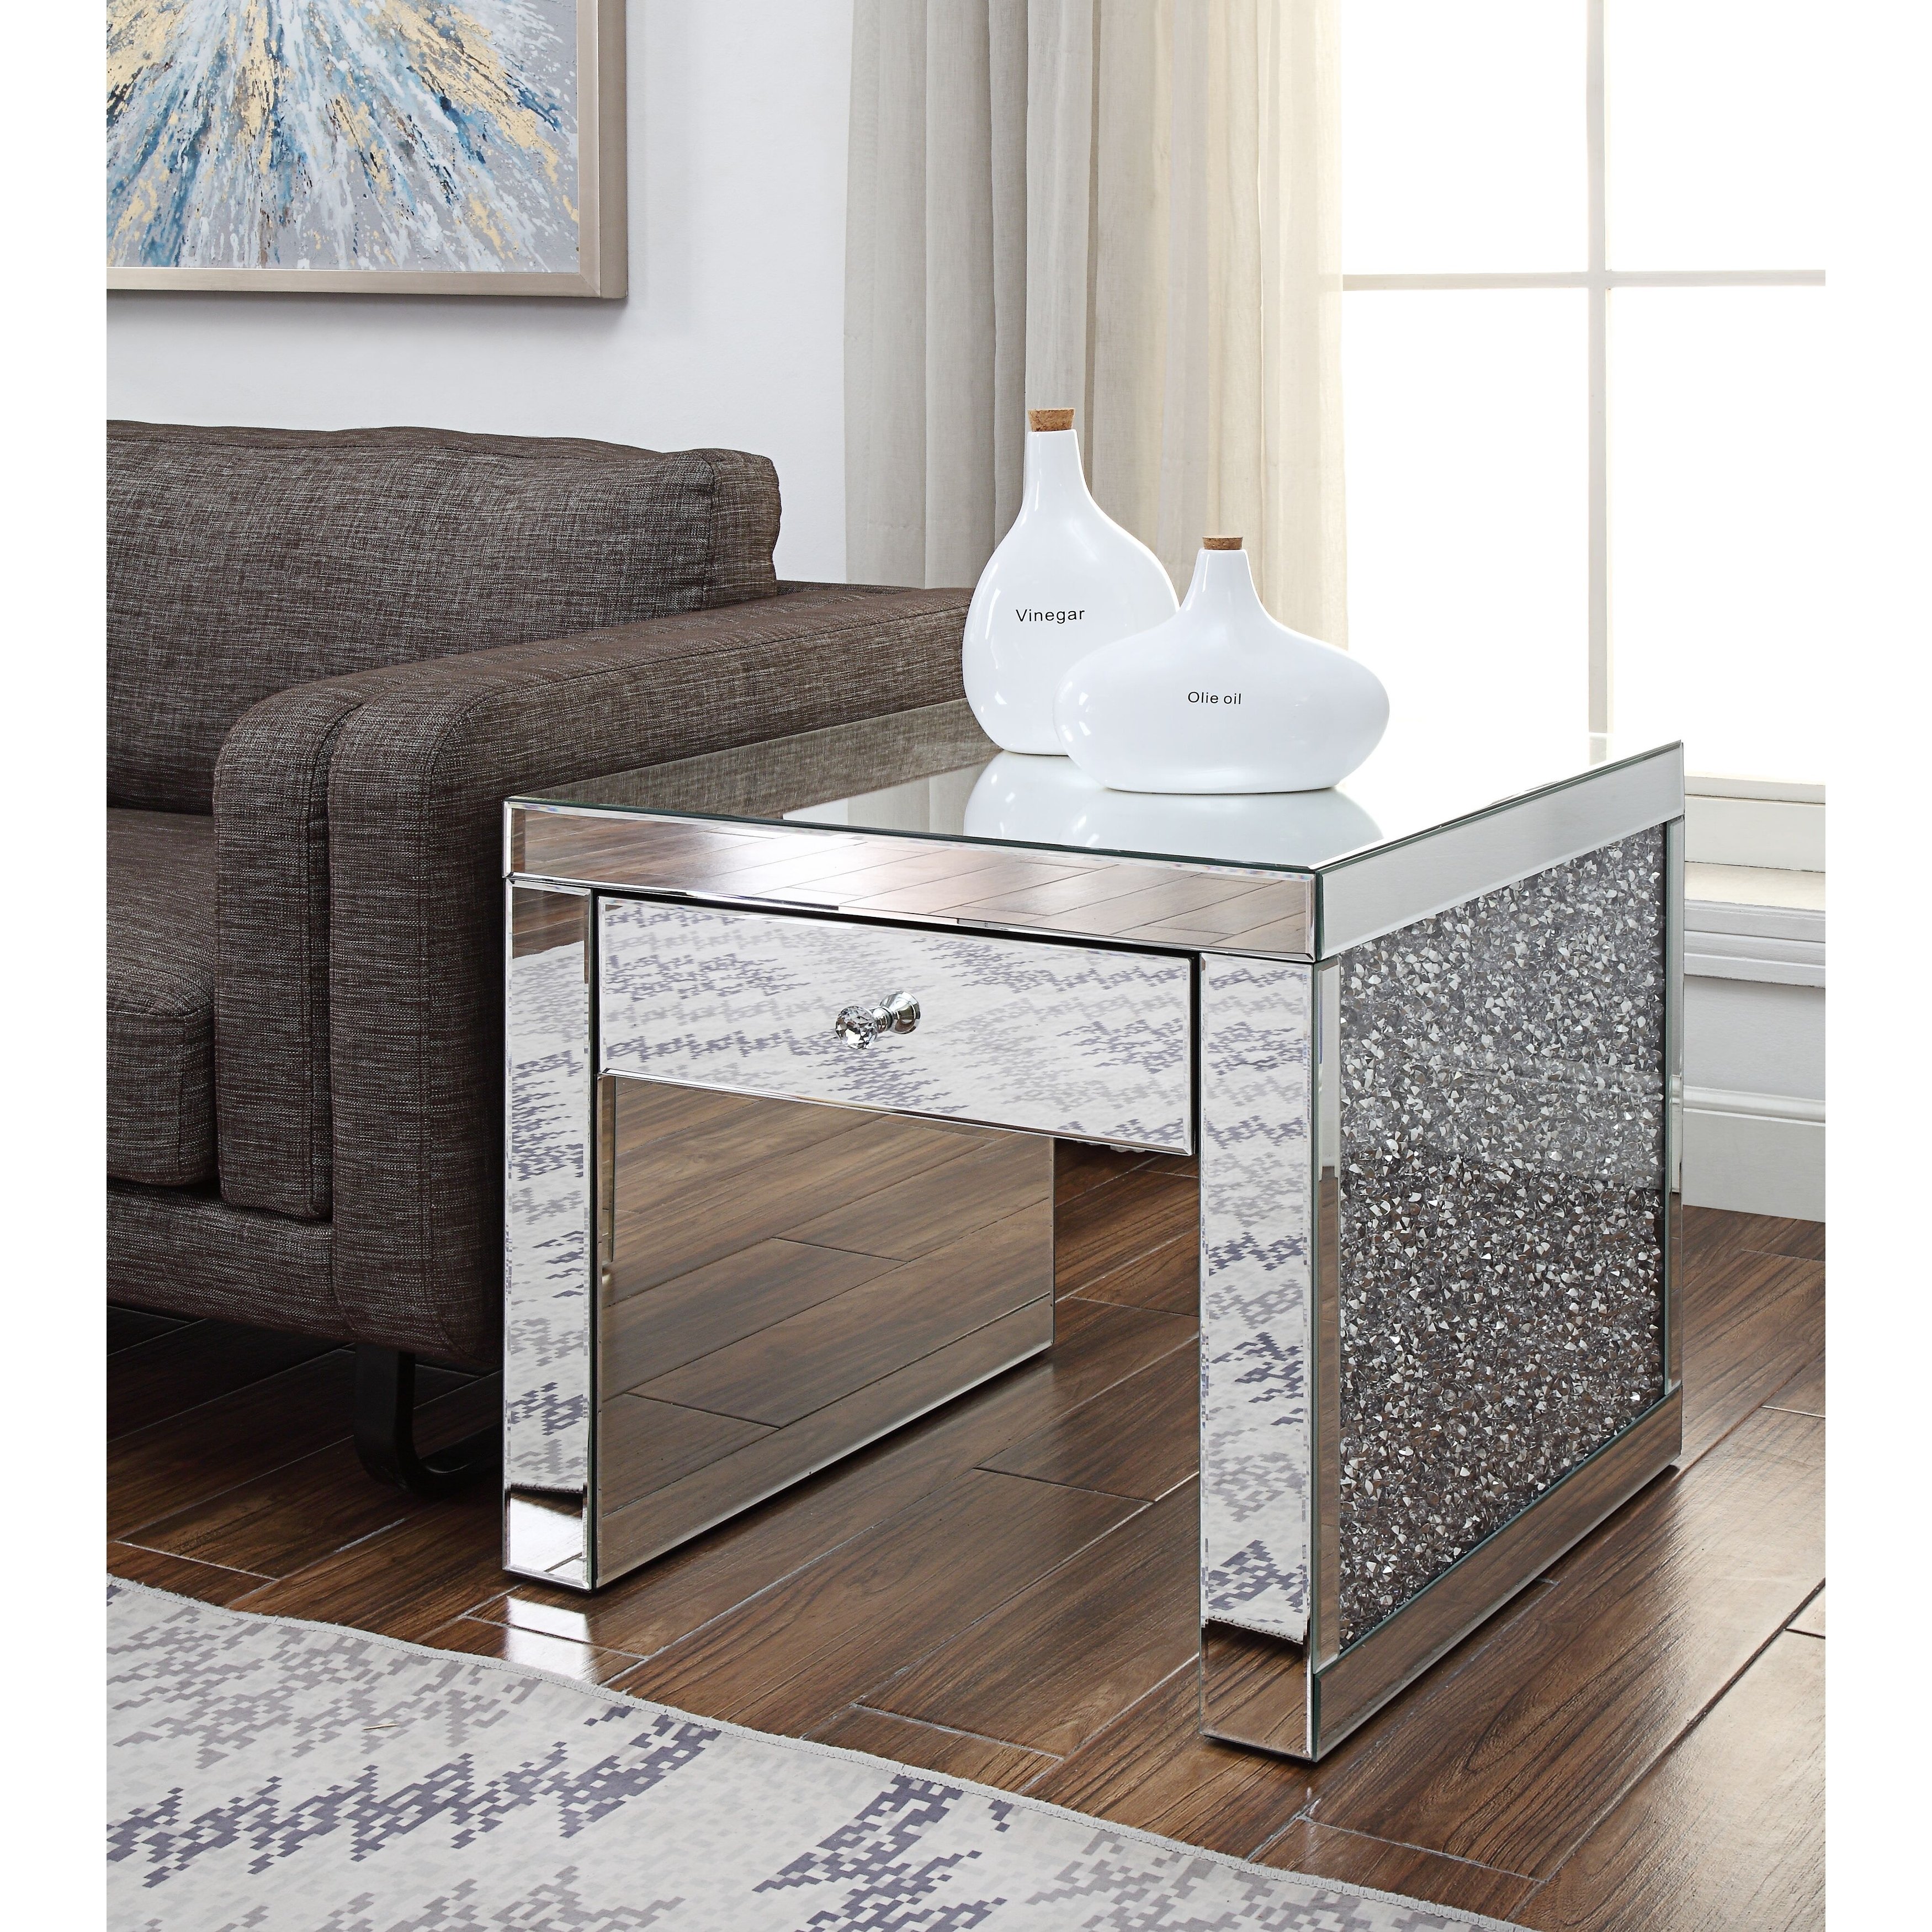 acme noland mirrored glass and faux diamond end table free accent shipping today sofa for small space living room kitchen lamp round wood side new home decoration cherry dining